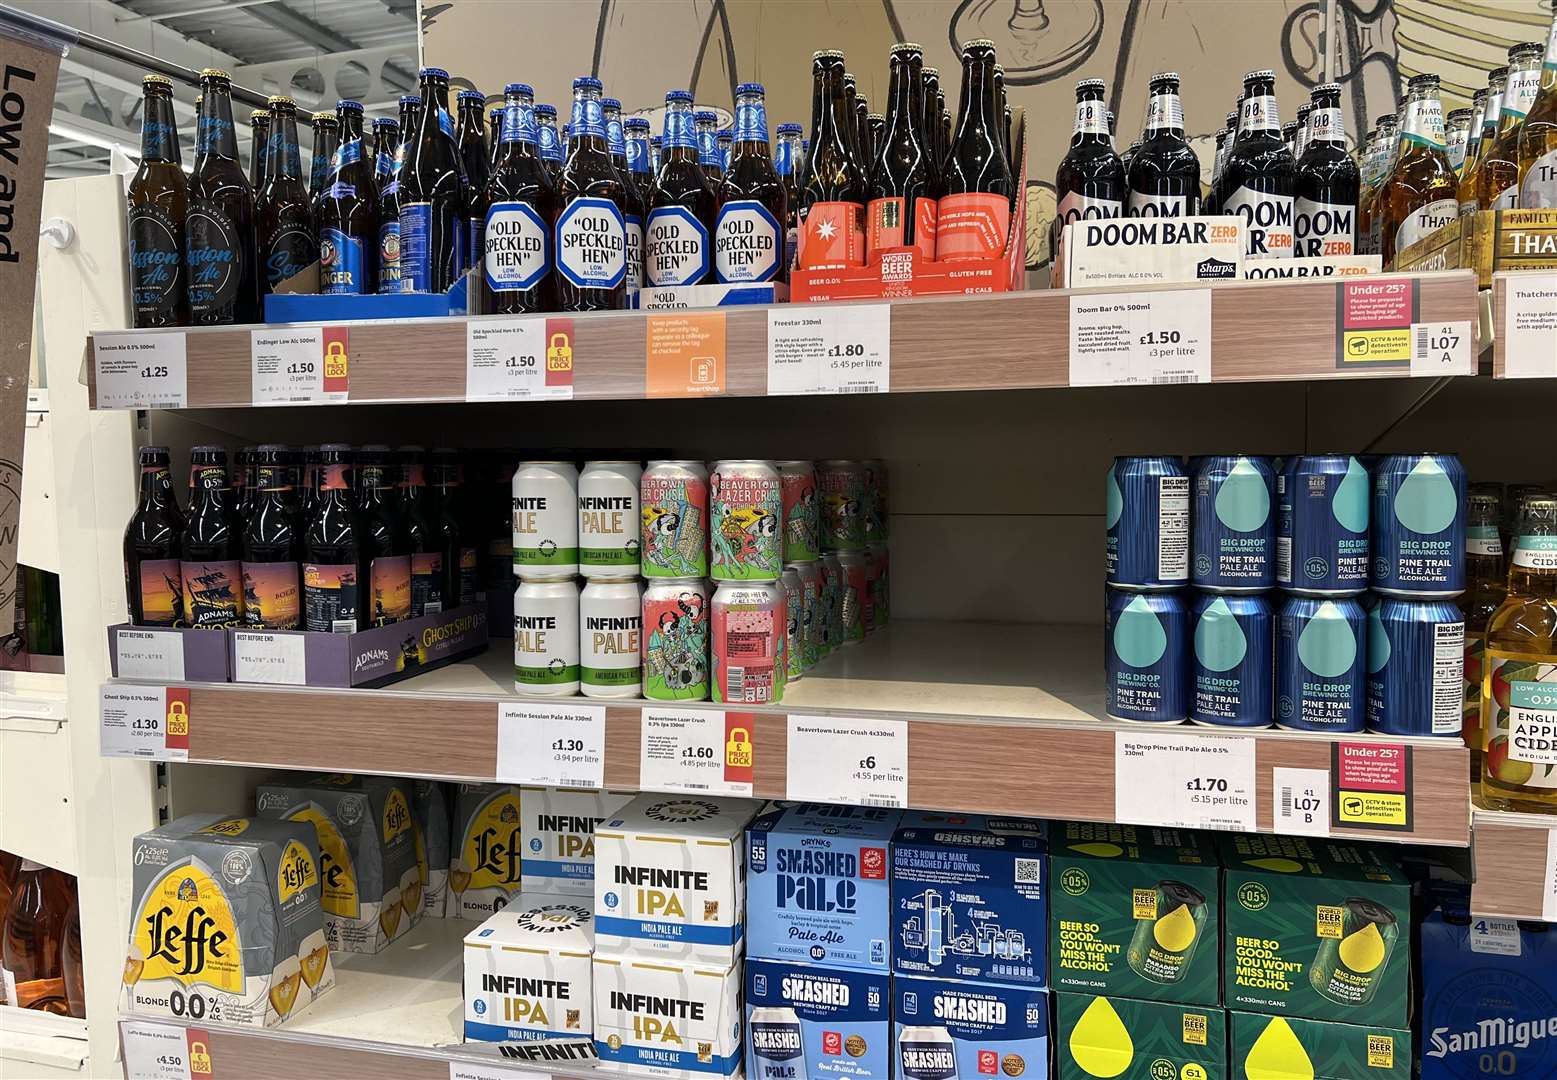 There is a growing range of non-alcoholic beers available